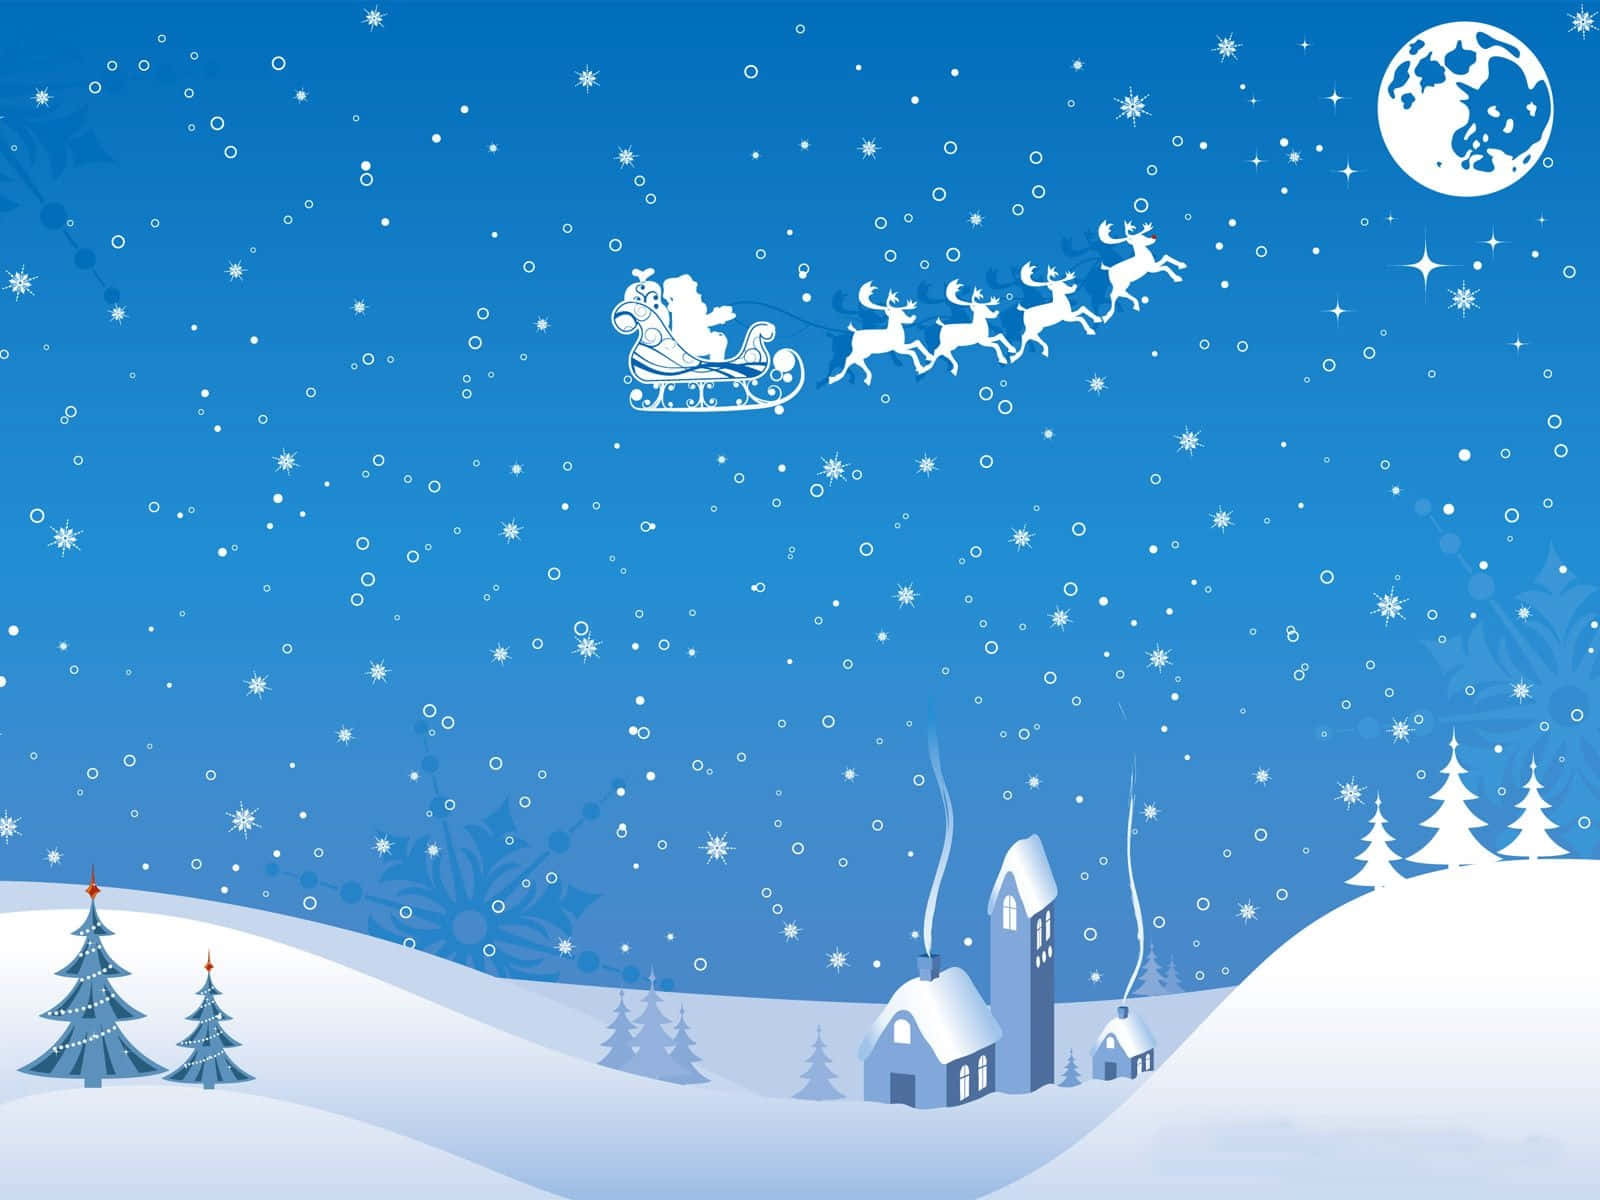 Santa Claus Flying Over A Snowy Landscape Wallpaper